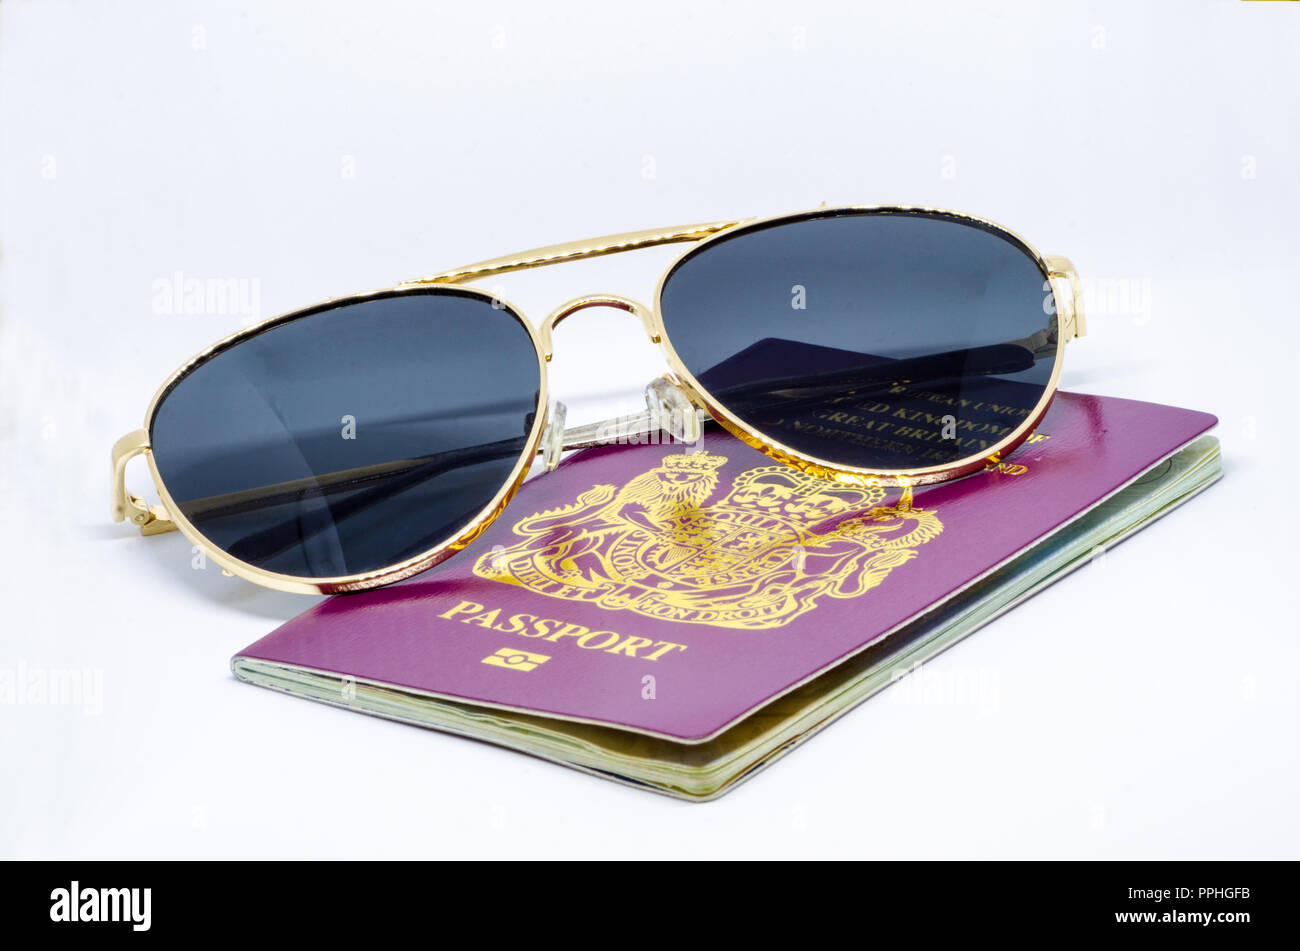 Holiday and Travel Concept - A red, burgundy, British European passport and a pair of sunglasses on a white background. Stock Photo